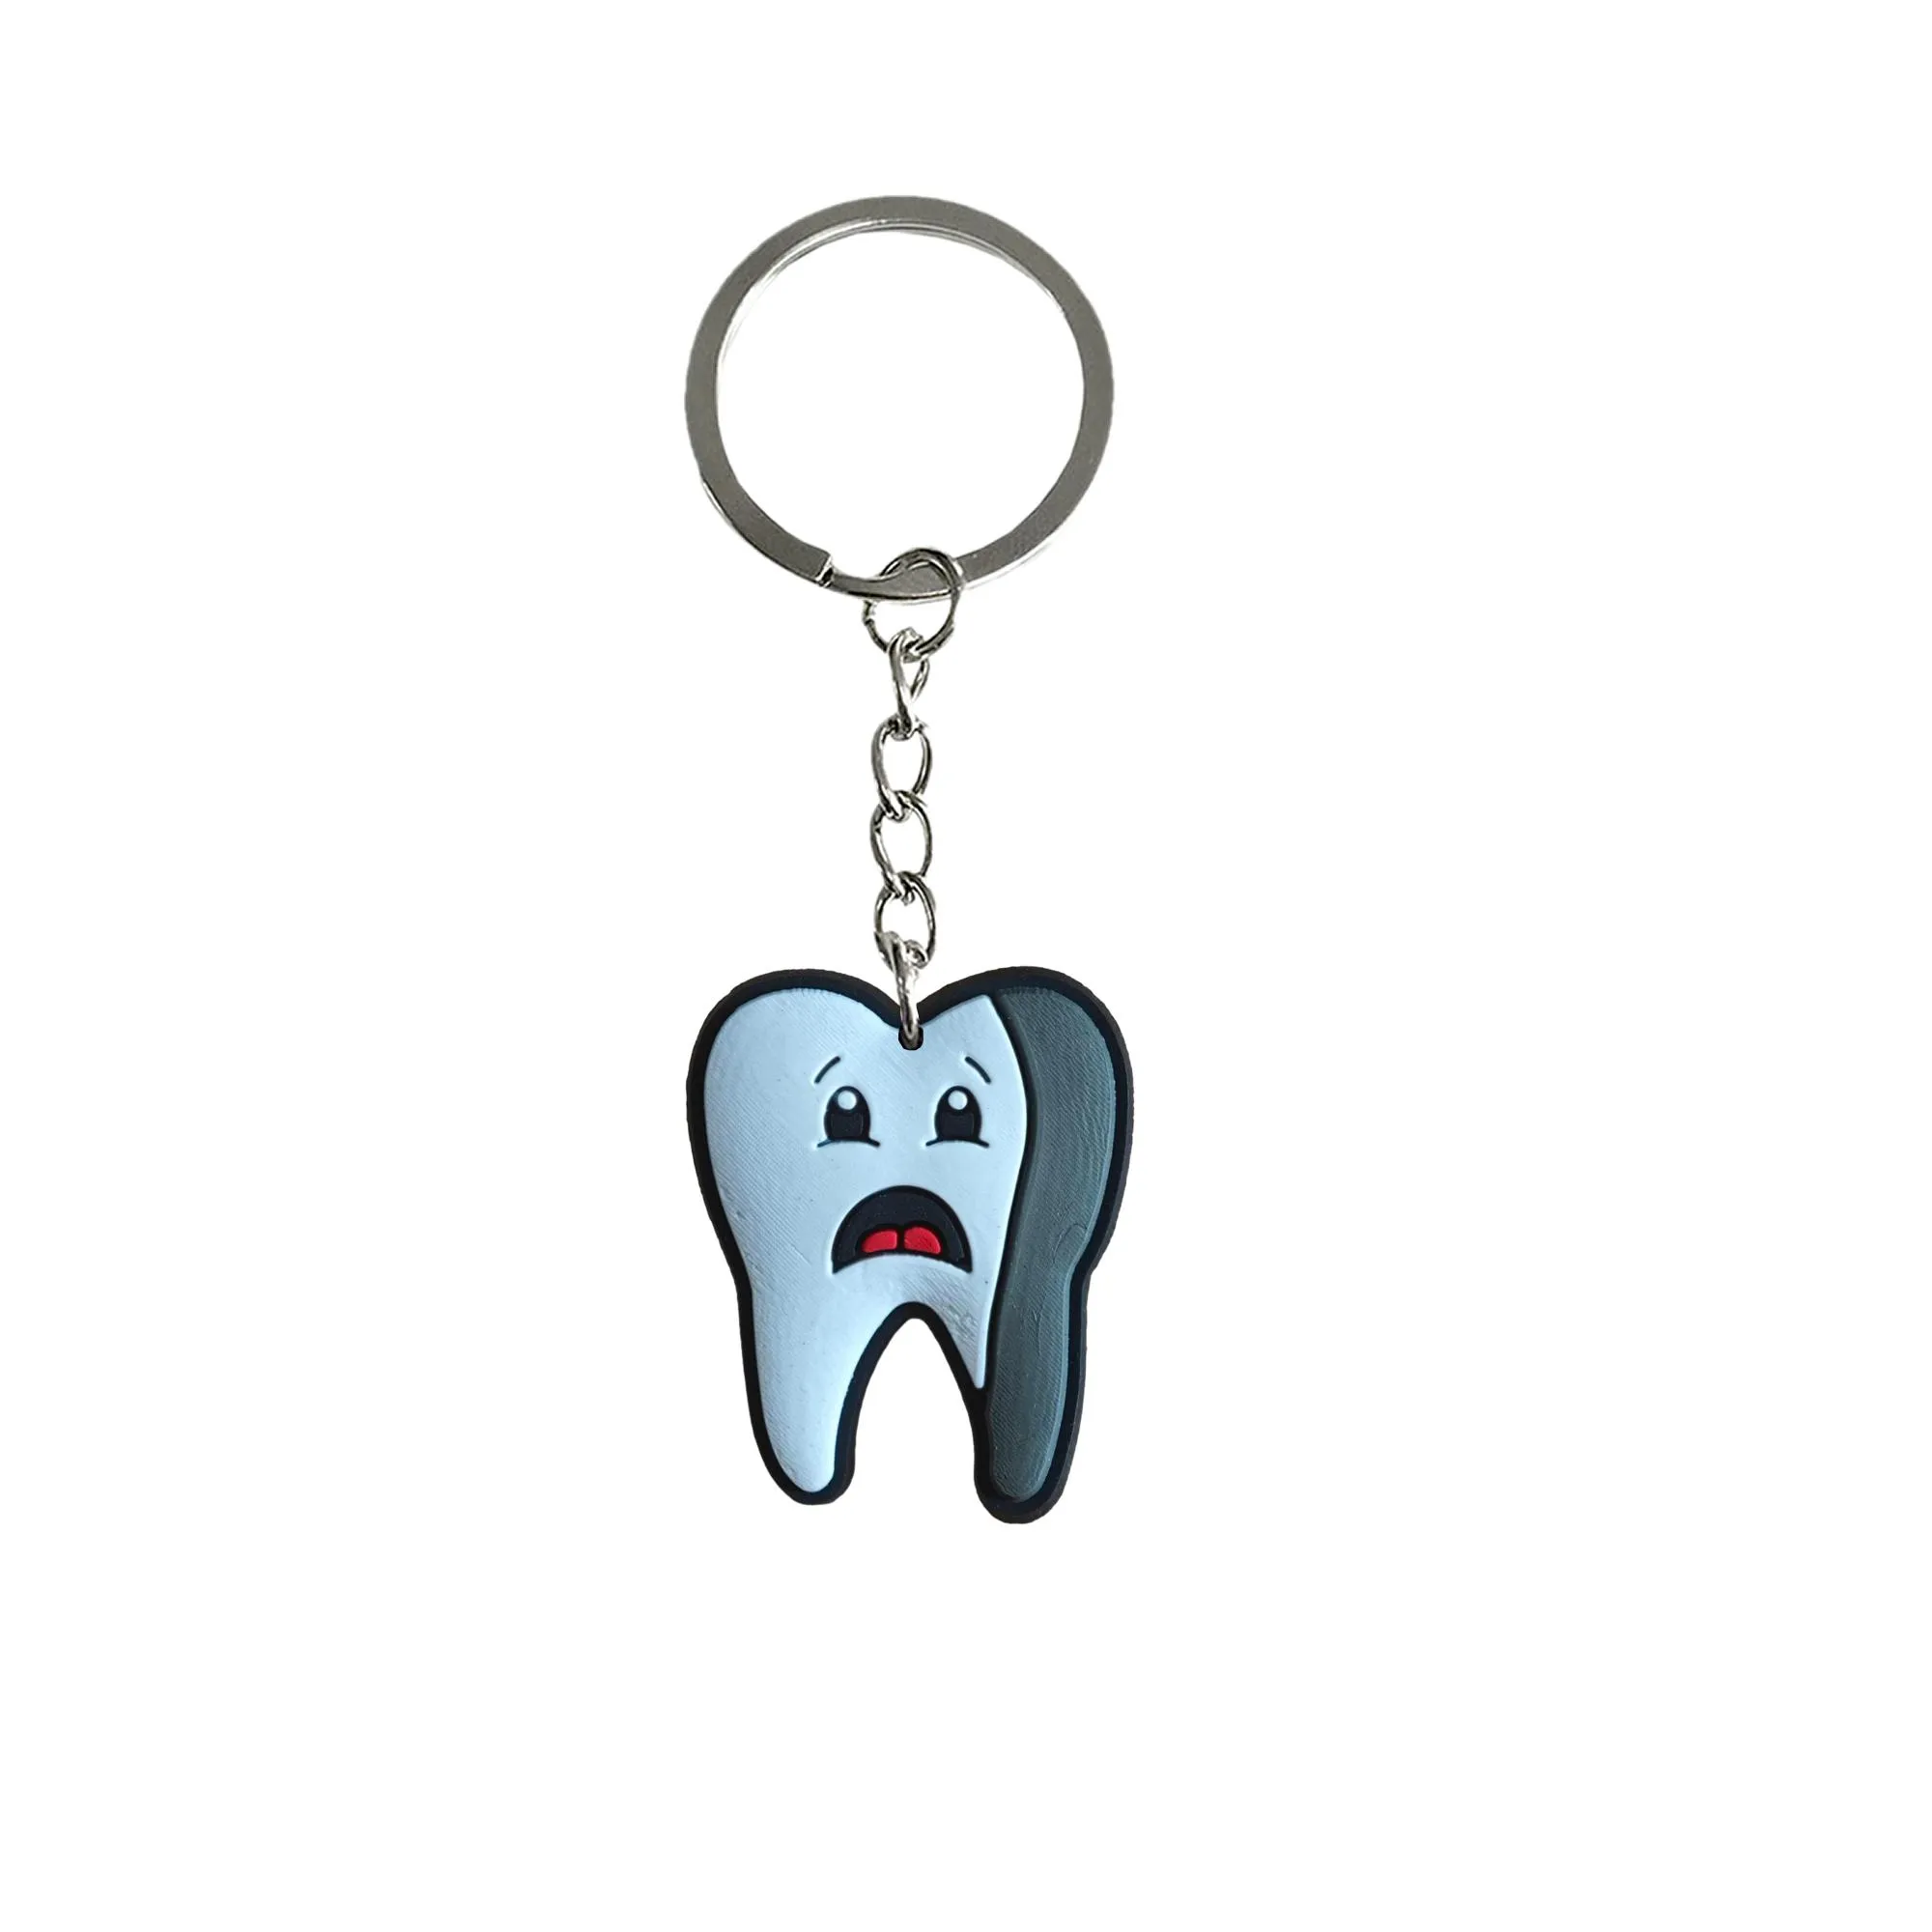 teeth 16 keychain for classroom prizes keychains tags goodie bag stuffer christmas gifts and holiday charms keyrings bags keyring suitable schoolbag key ring women boys pendants accessories kids birthday party favors